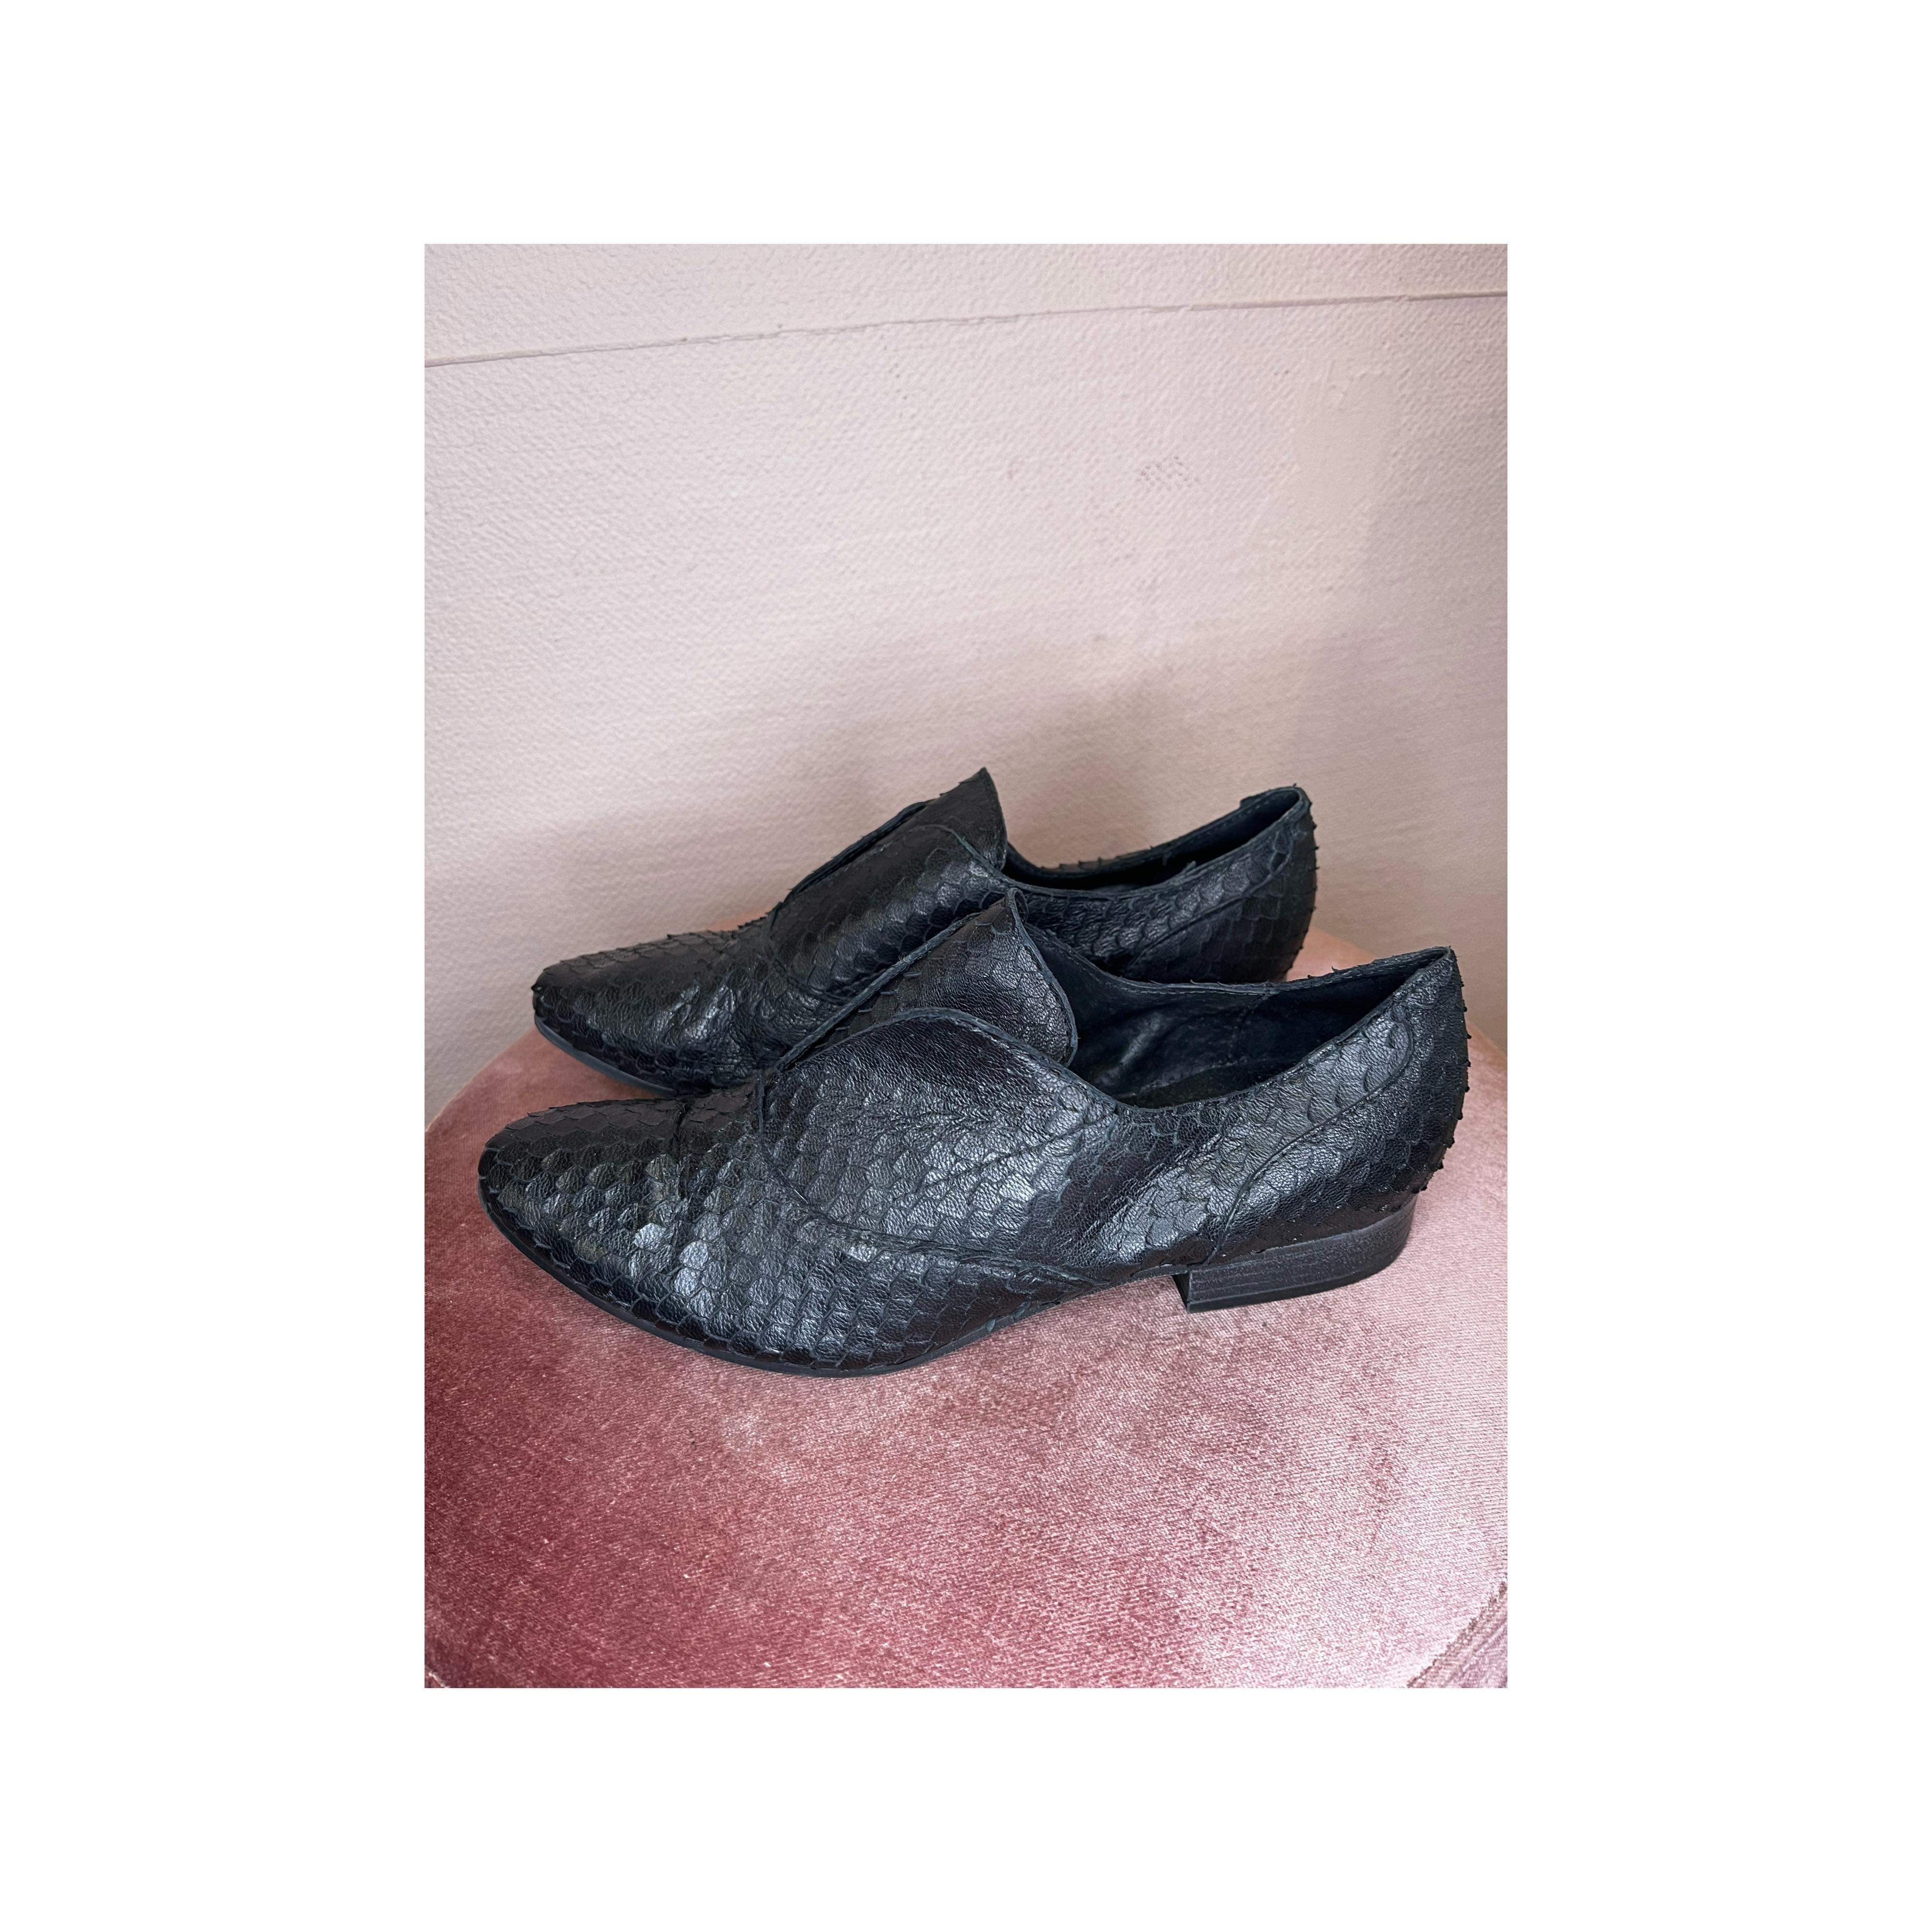 Bata - Loafers - Size: 37